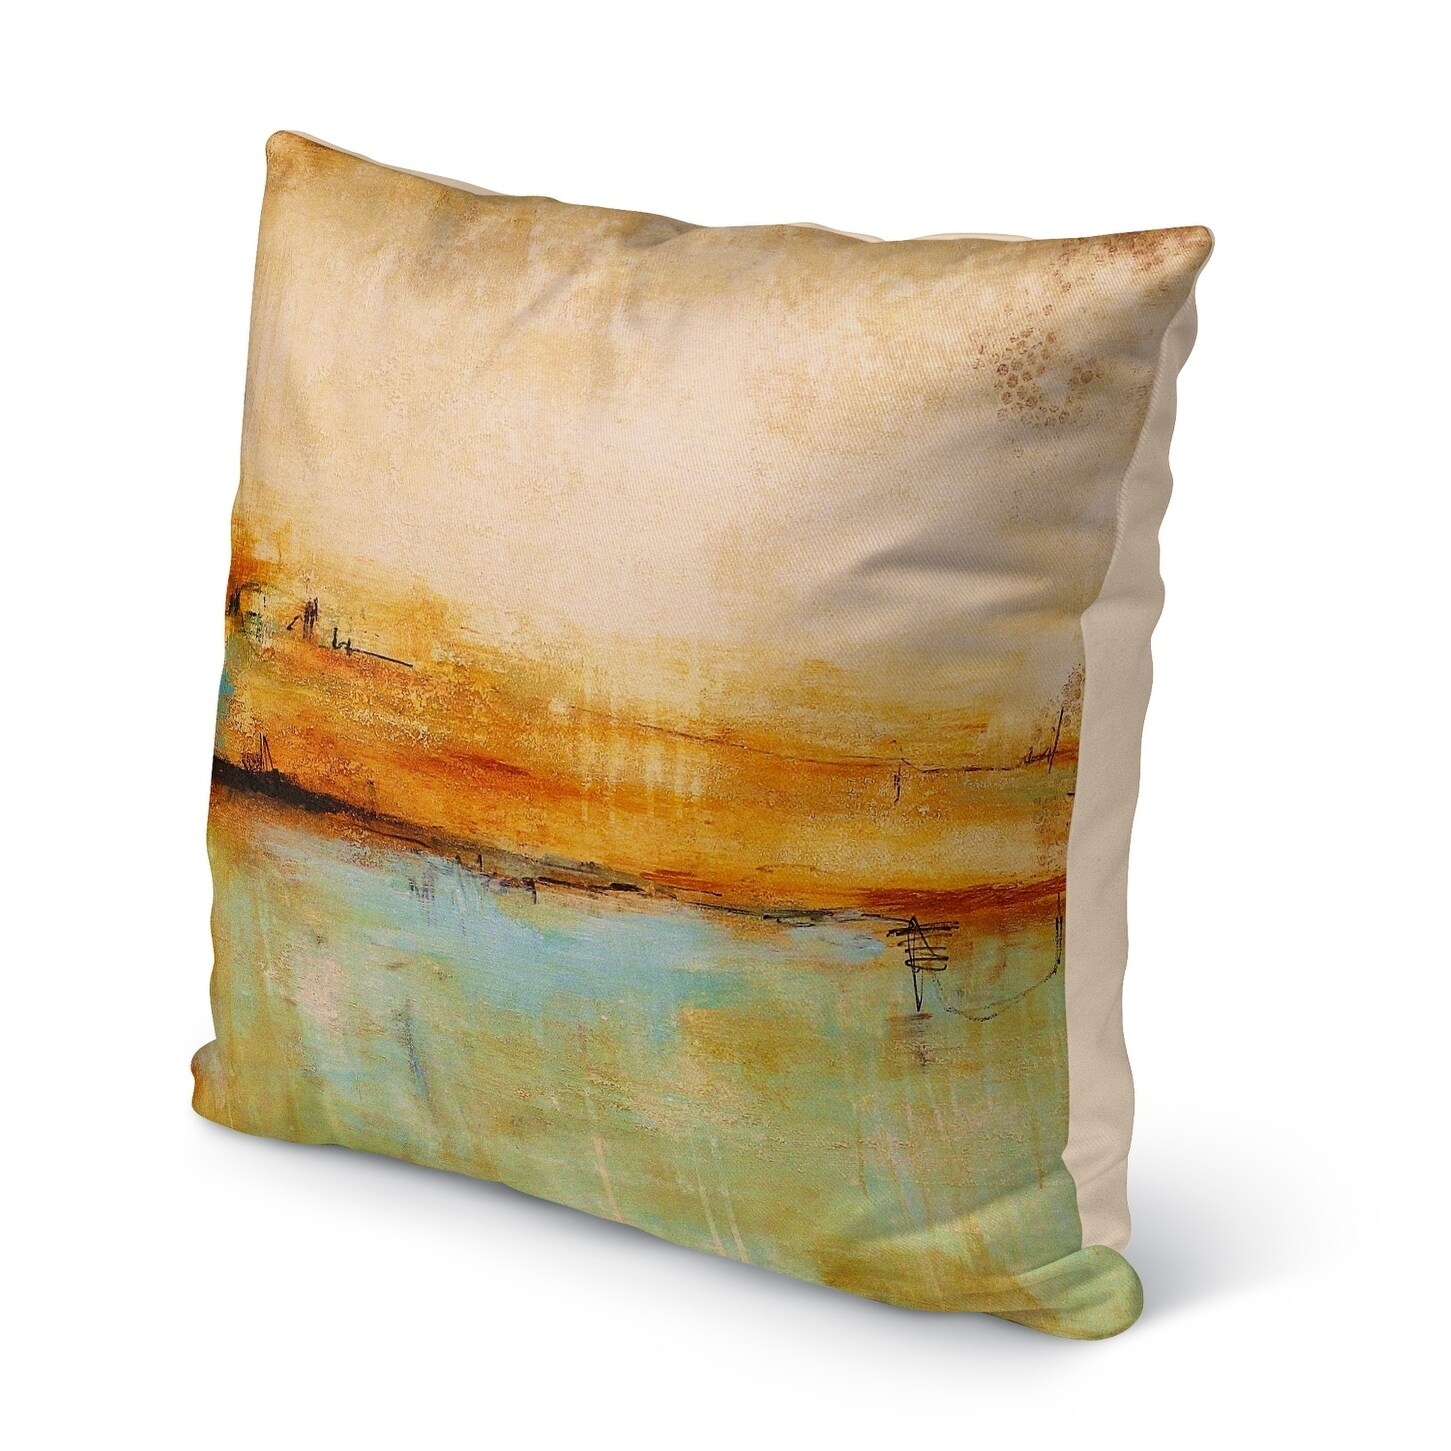 https://ak1.ostkcdn.com/images/products/16963297/Kavka-Designs-taupe-blue-tan-southwestern-abstract-outdoor-pillow-with-insert-dffa21e7-83e5-4642-844c-71095689bbea.jpg